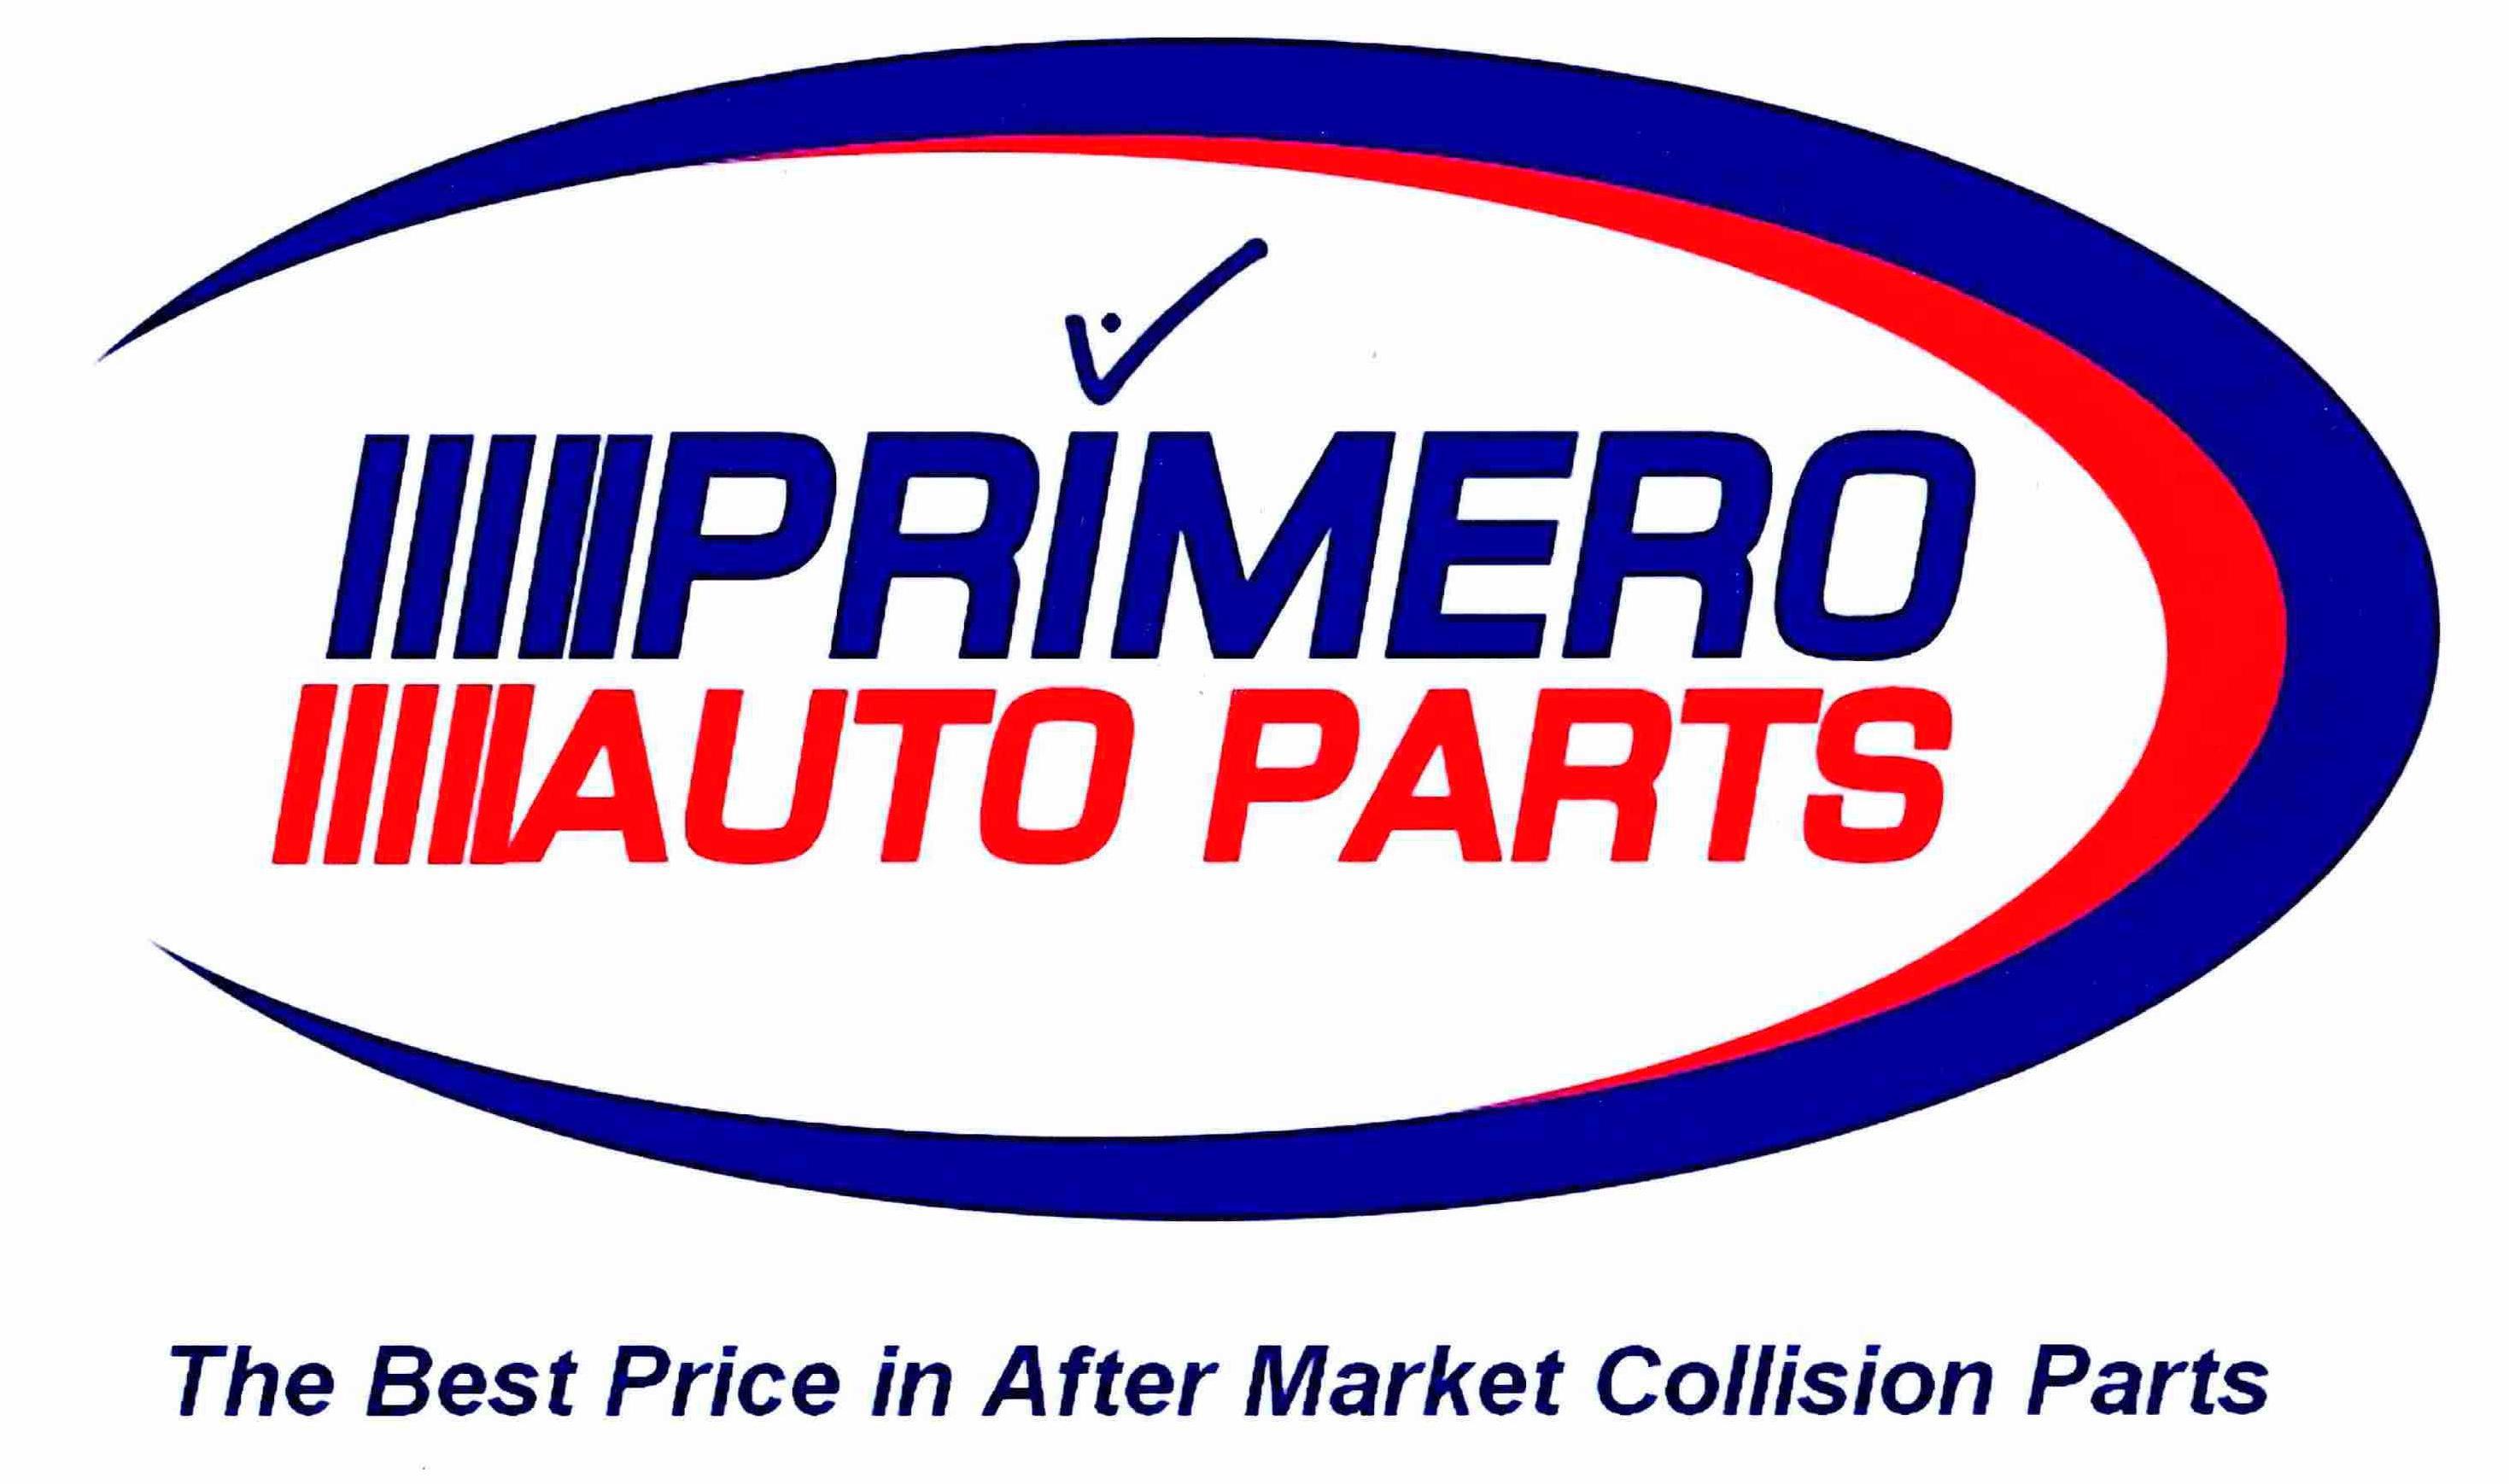 PRIMERO AUTO PARTS THE BEST PRICE IN AFTER MARKET COLLISION PARTS